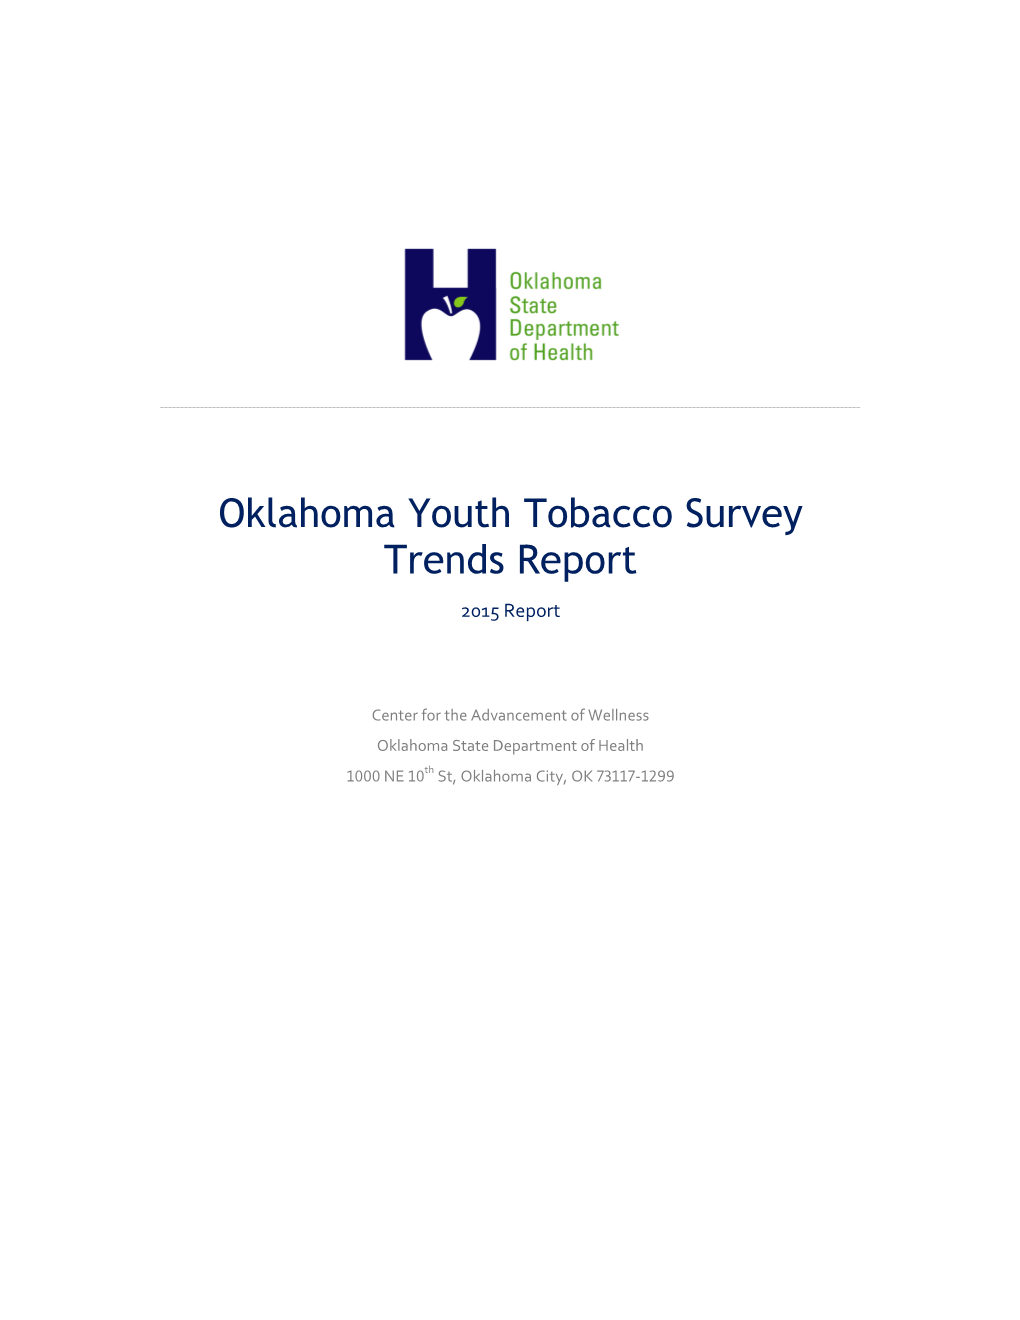 Oklahoma Youth Tobacco Survey Trends Report 2015 Report